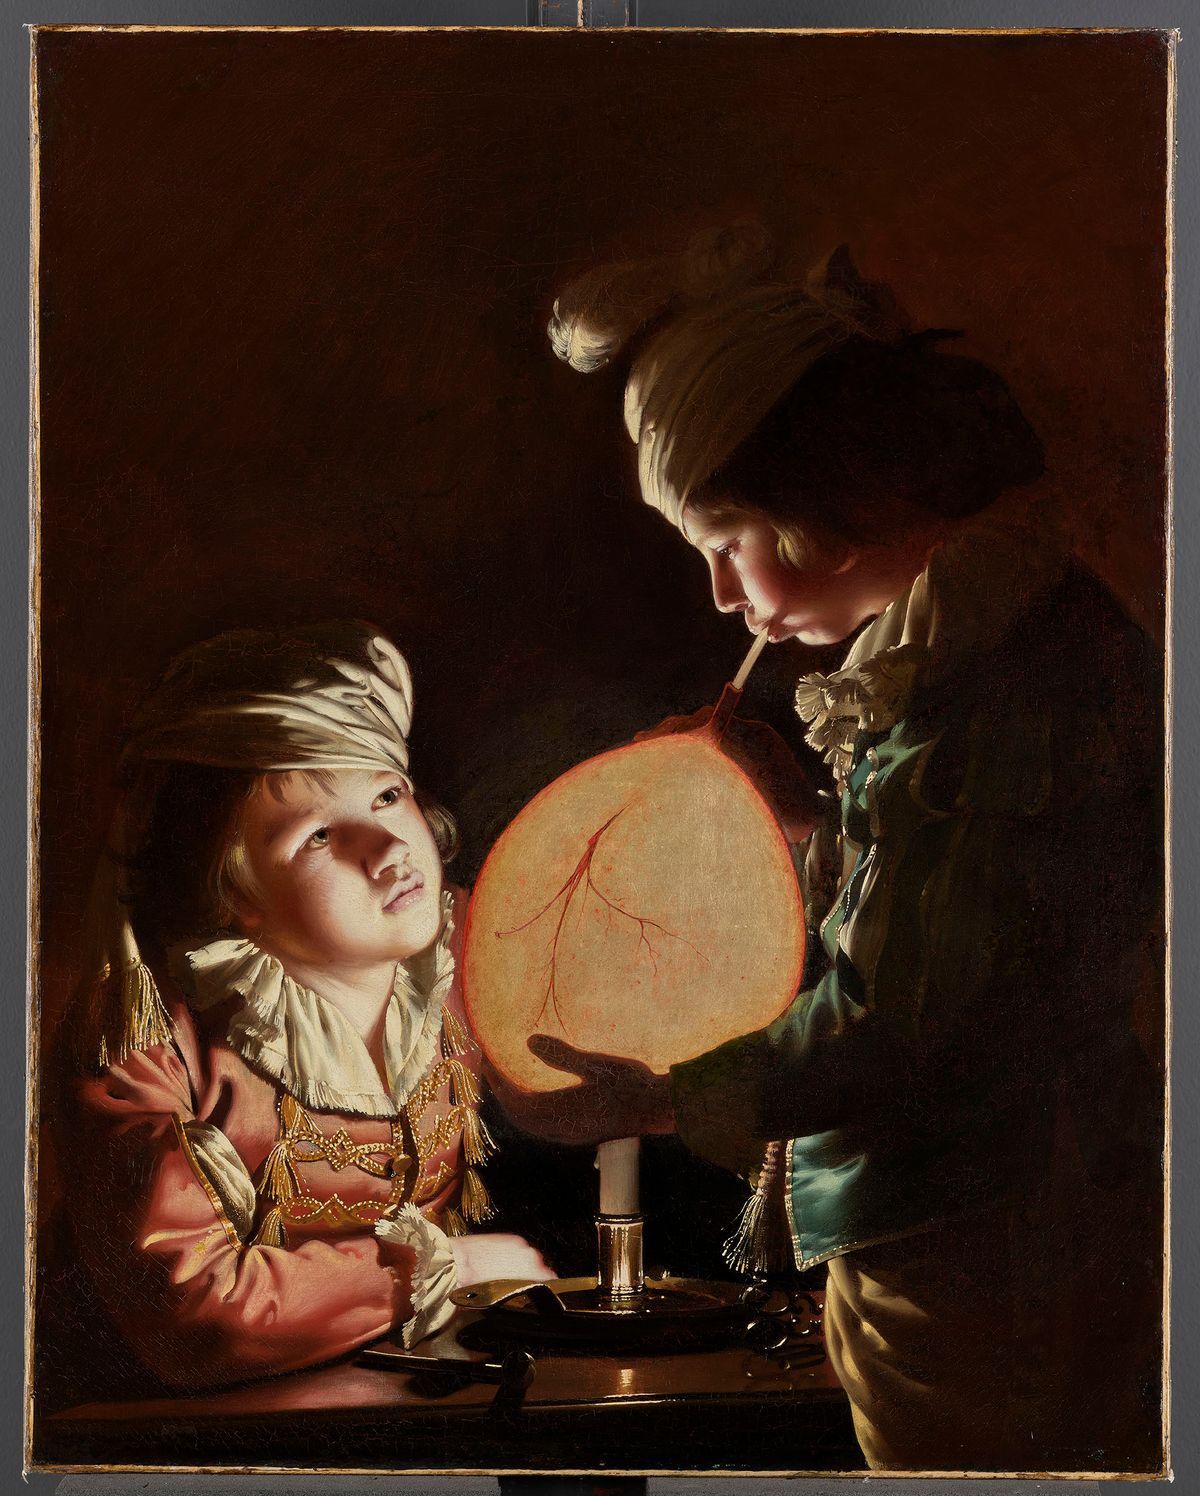 Joseph Wright of Derby's Two Boys with a Bladder (around 1769-70) Courtesy J. Paul Getty Trust